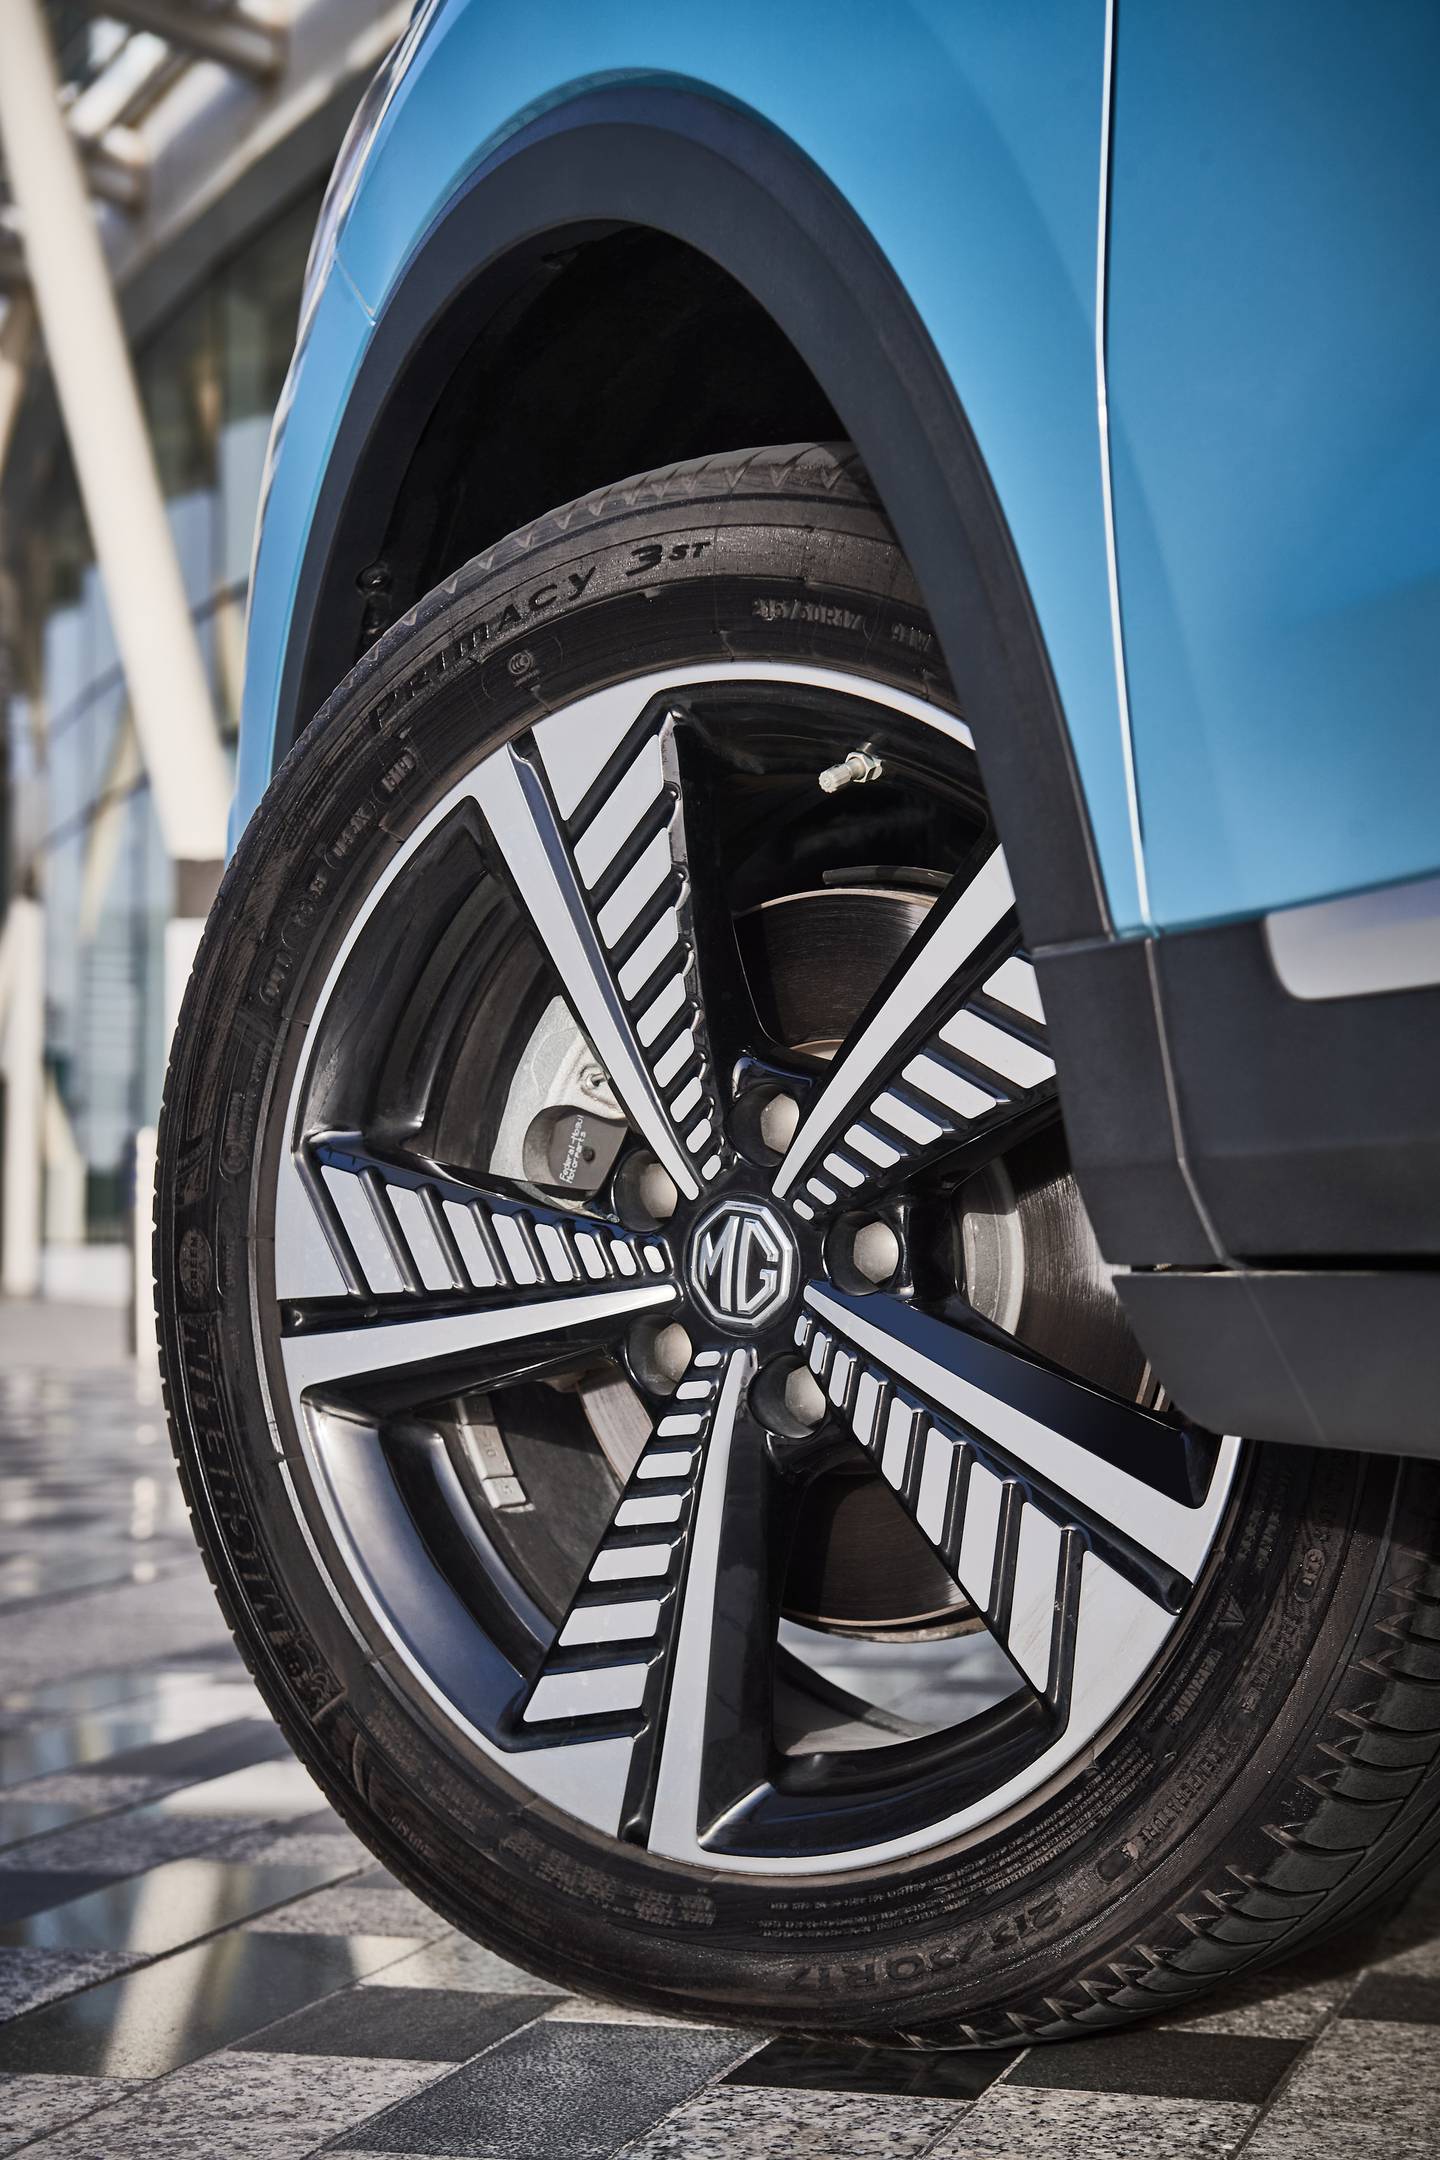 The level of equipment is impressive, including 17-inch alloy wheels